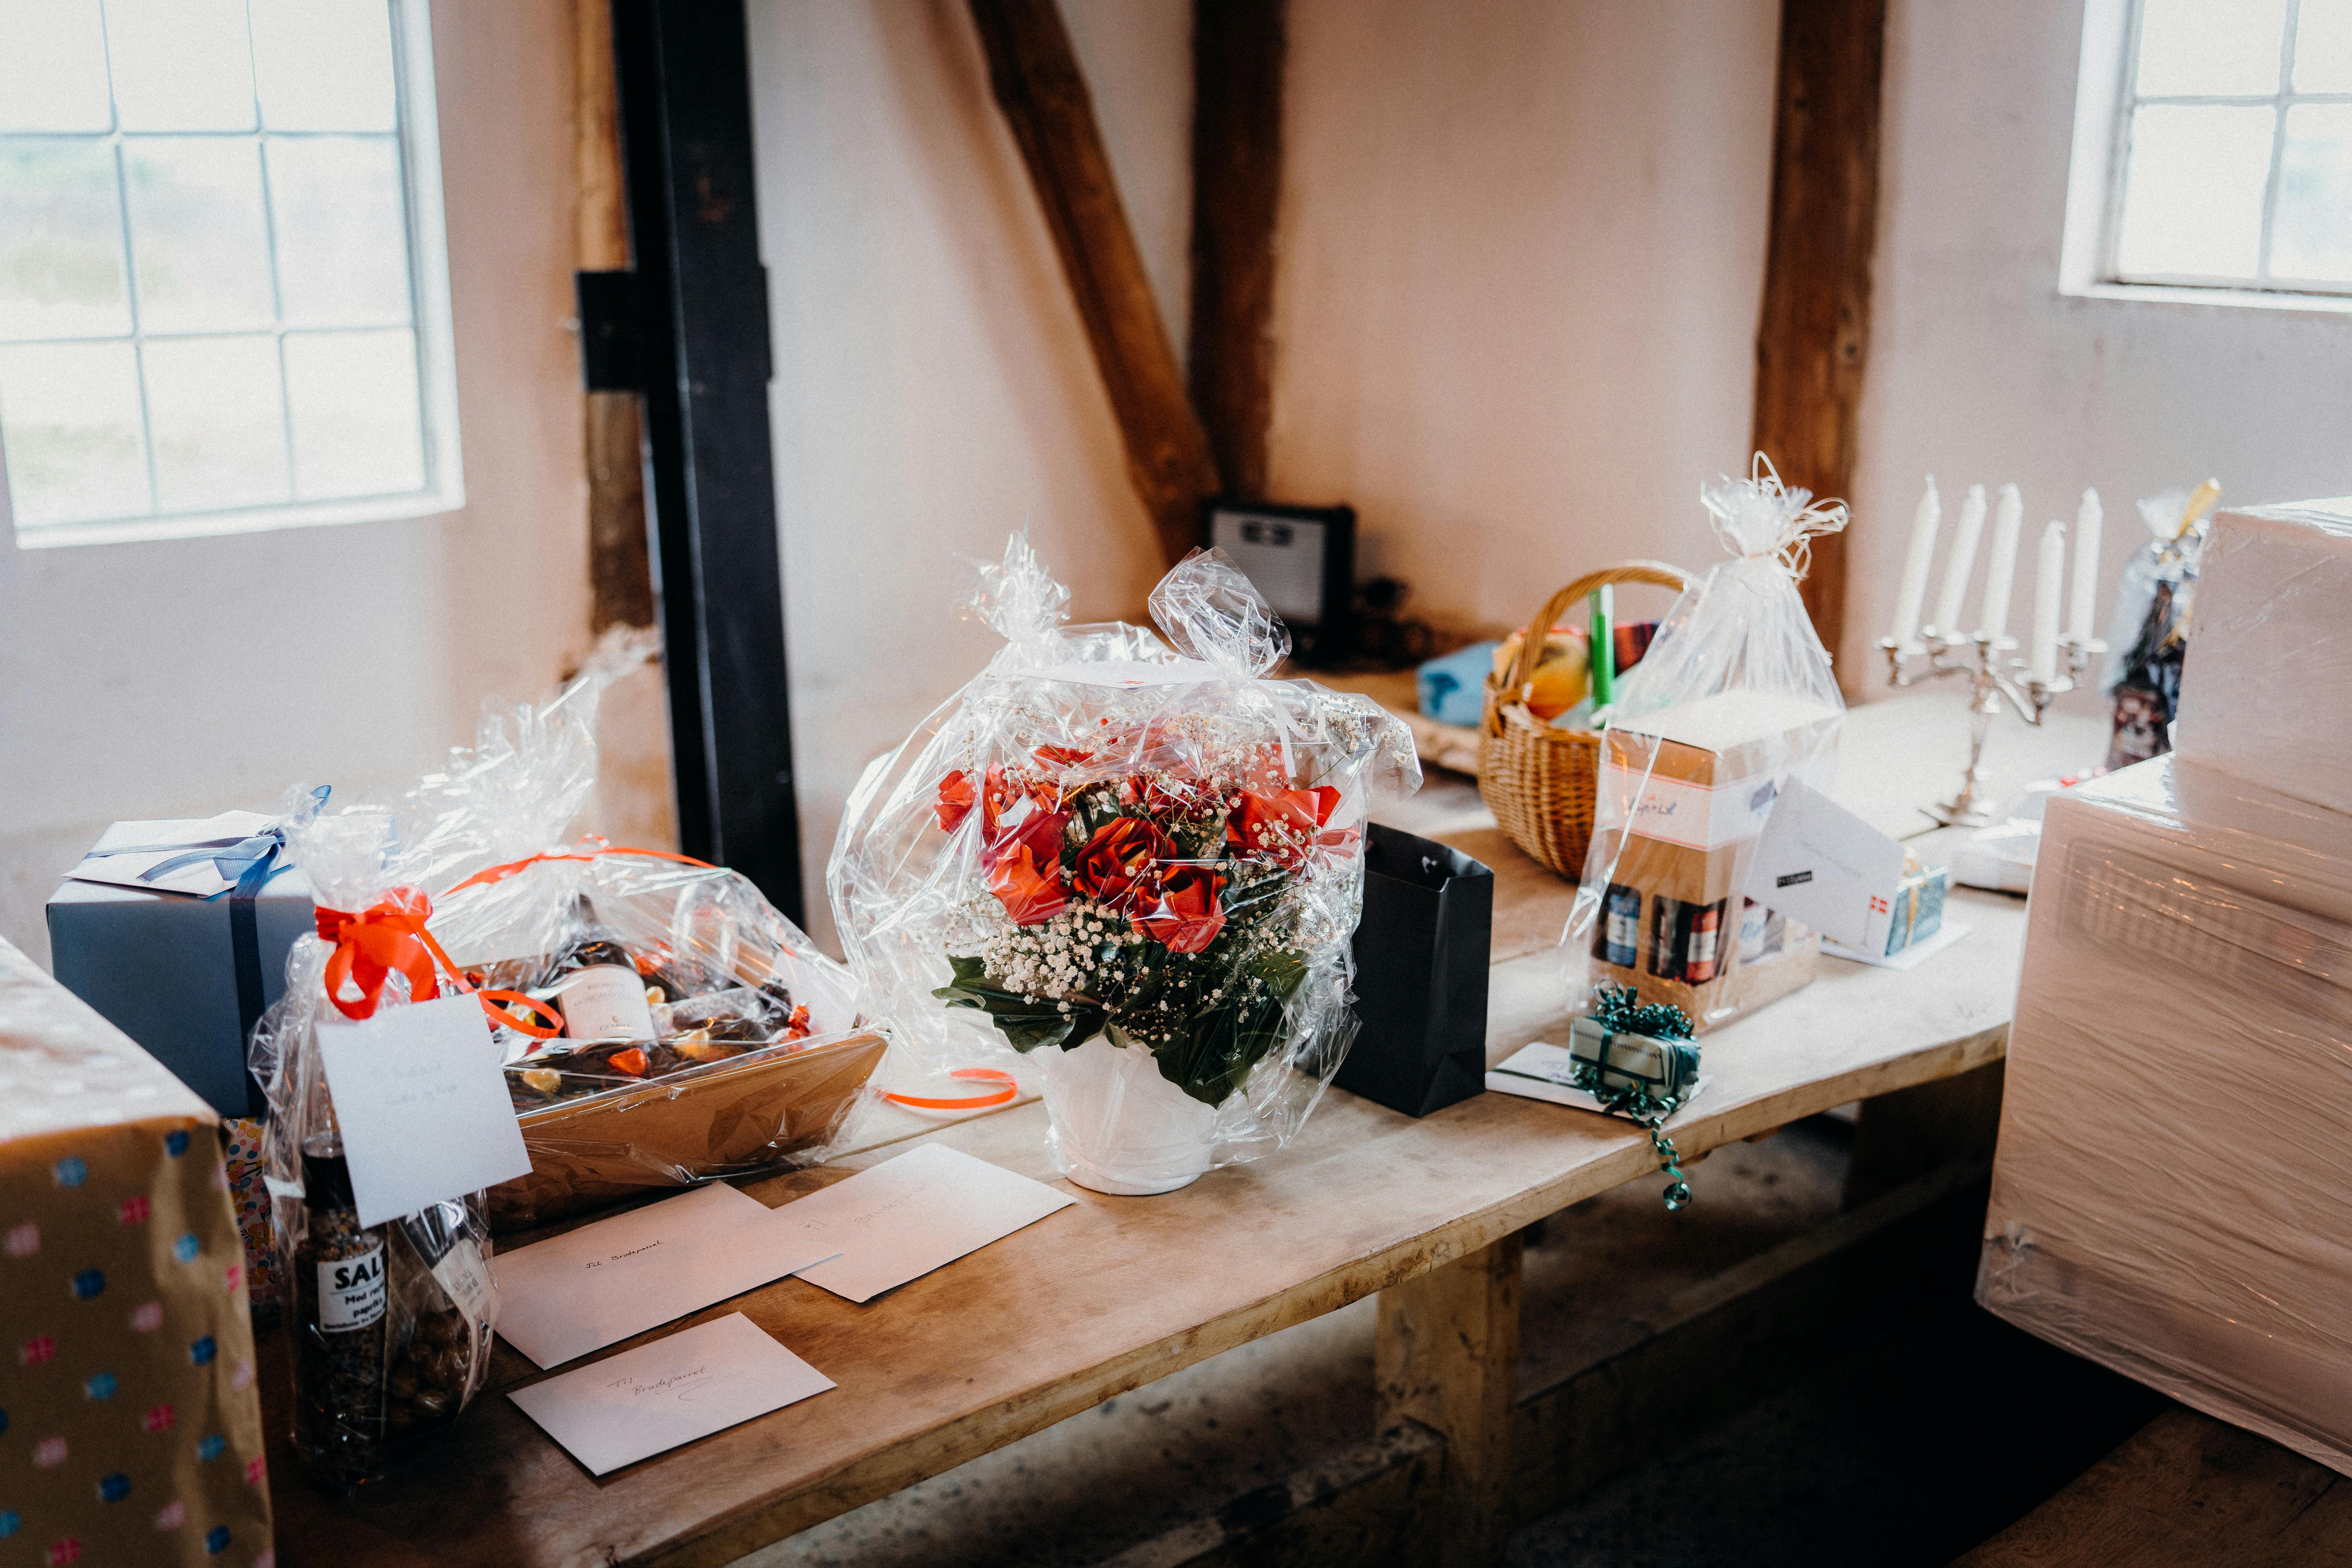 A table full of gifts | Source: Pexels